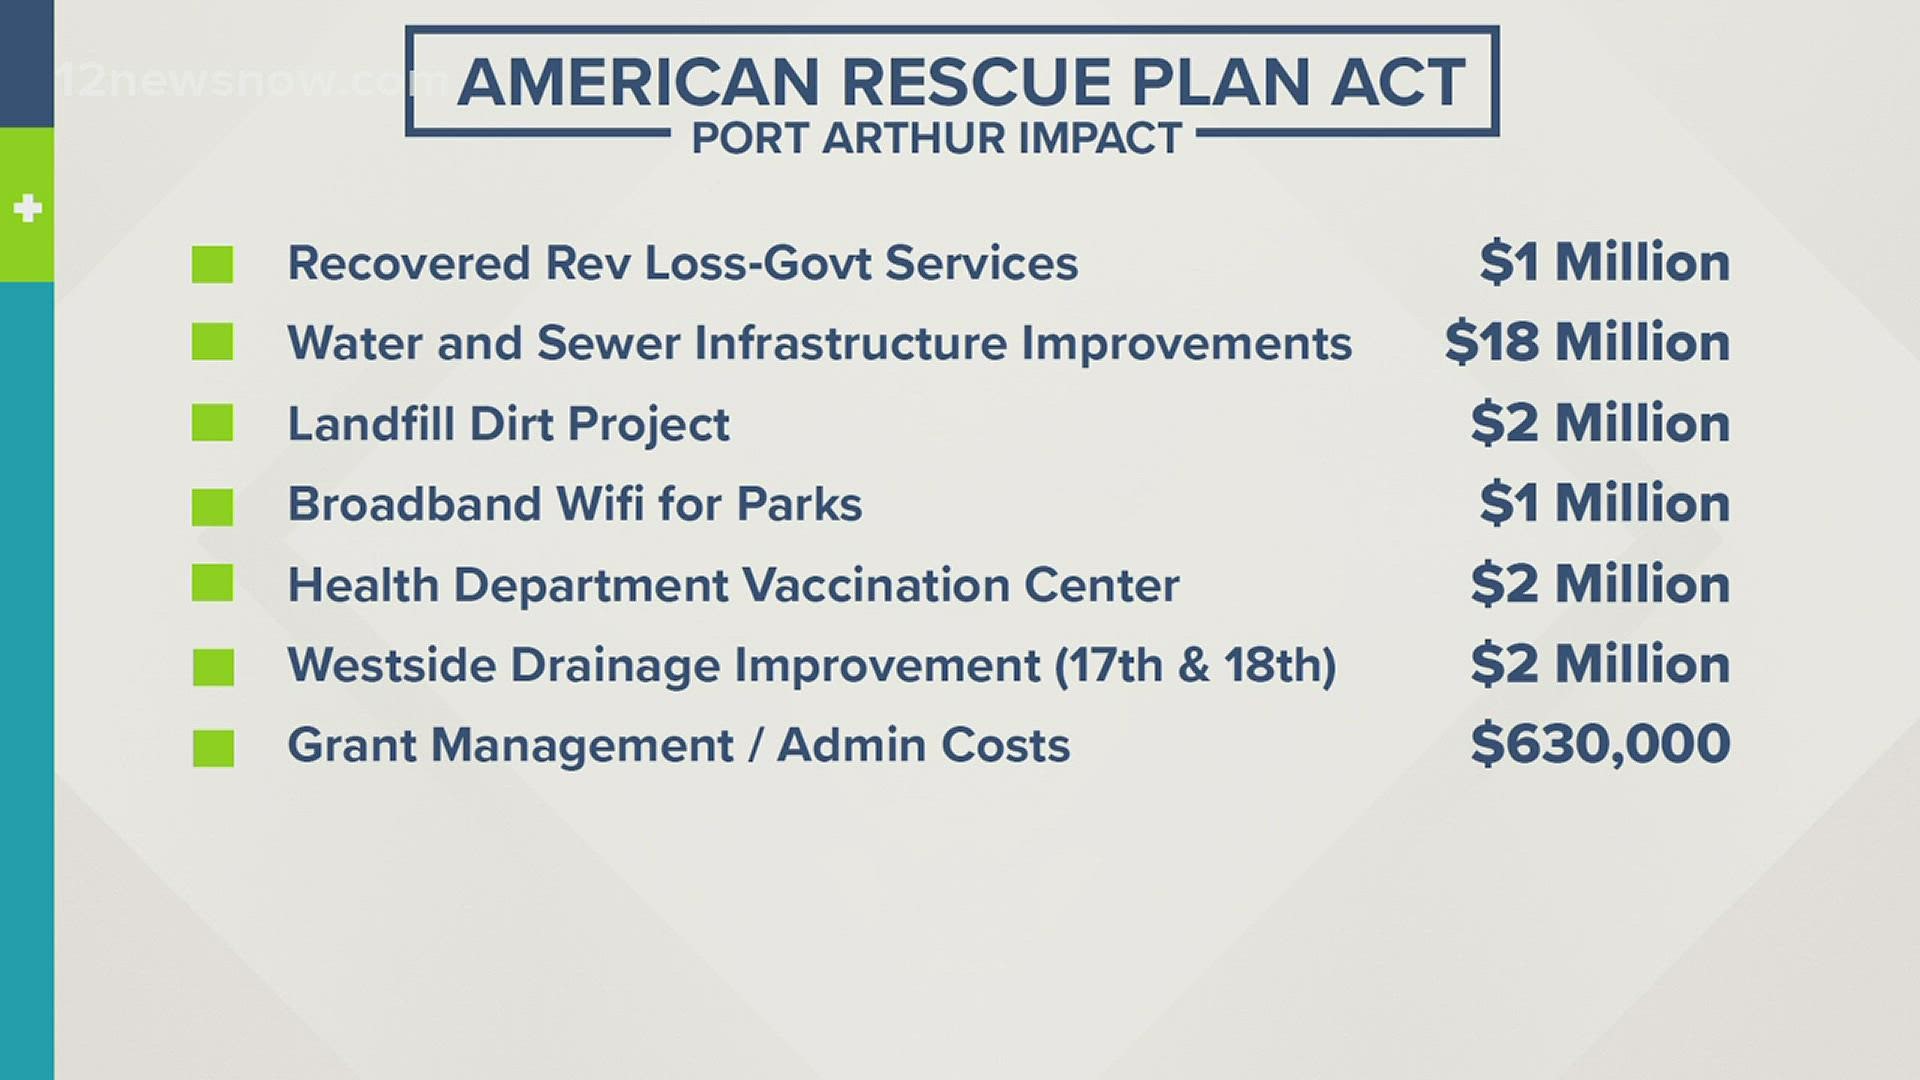 The City of Port Arthur will be hosting a virtual public hearing to obtain input regarding the city's acceptance of federal funds from the American Rescue Plan Act.